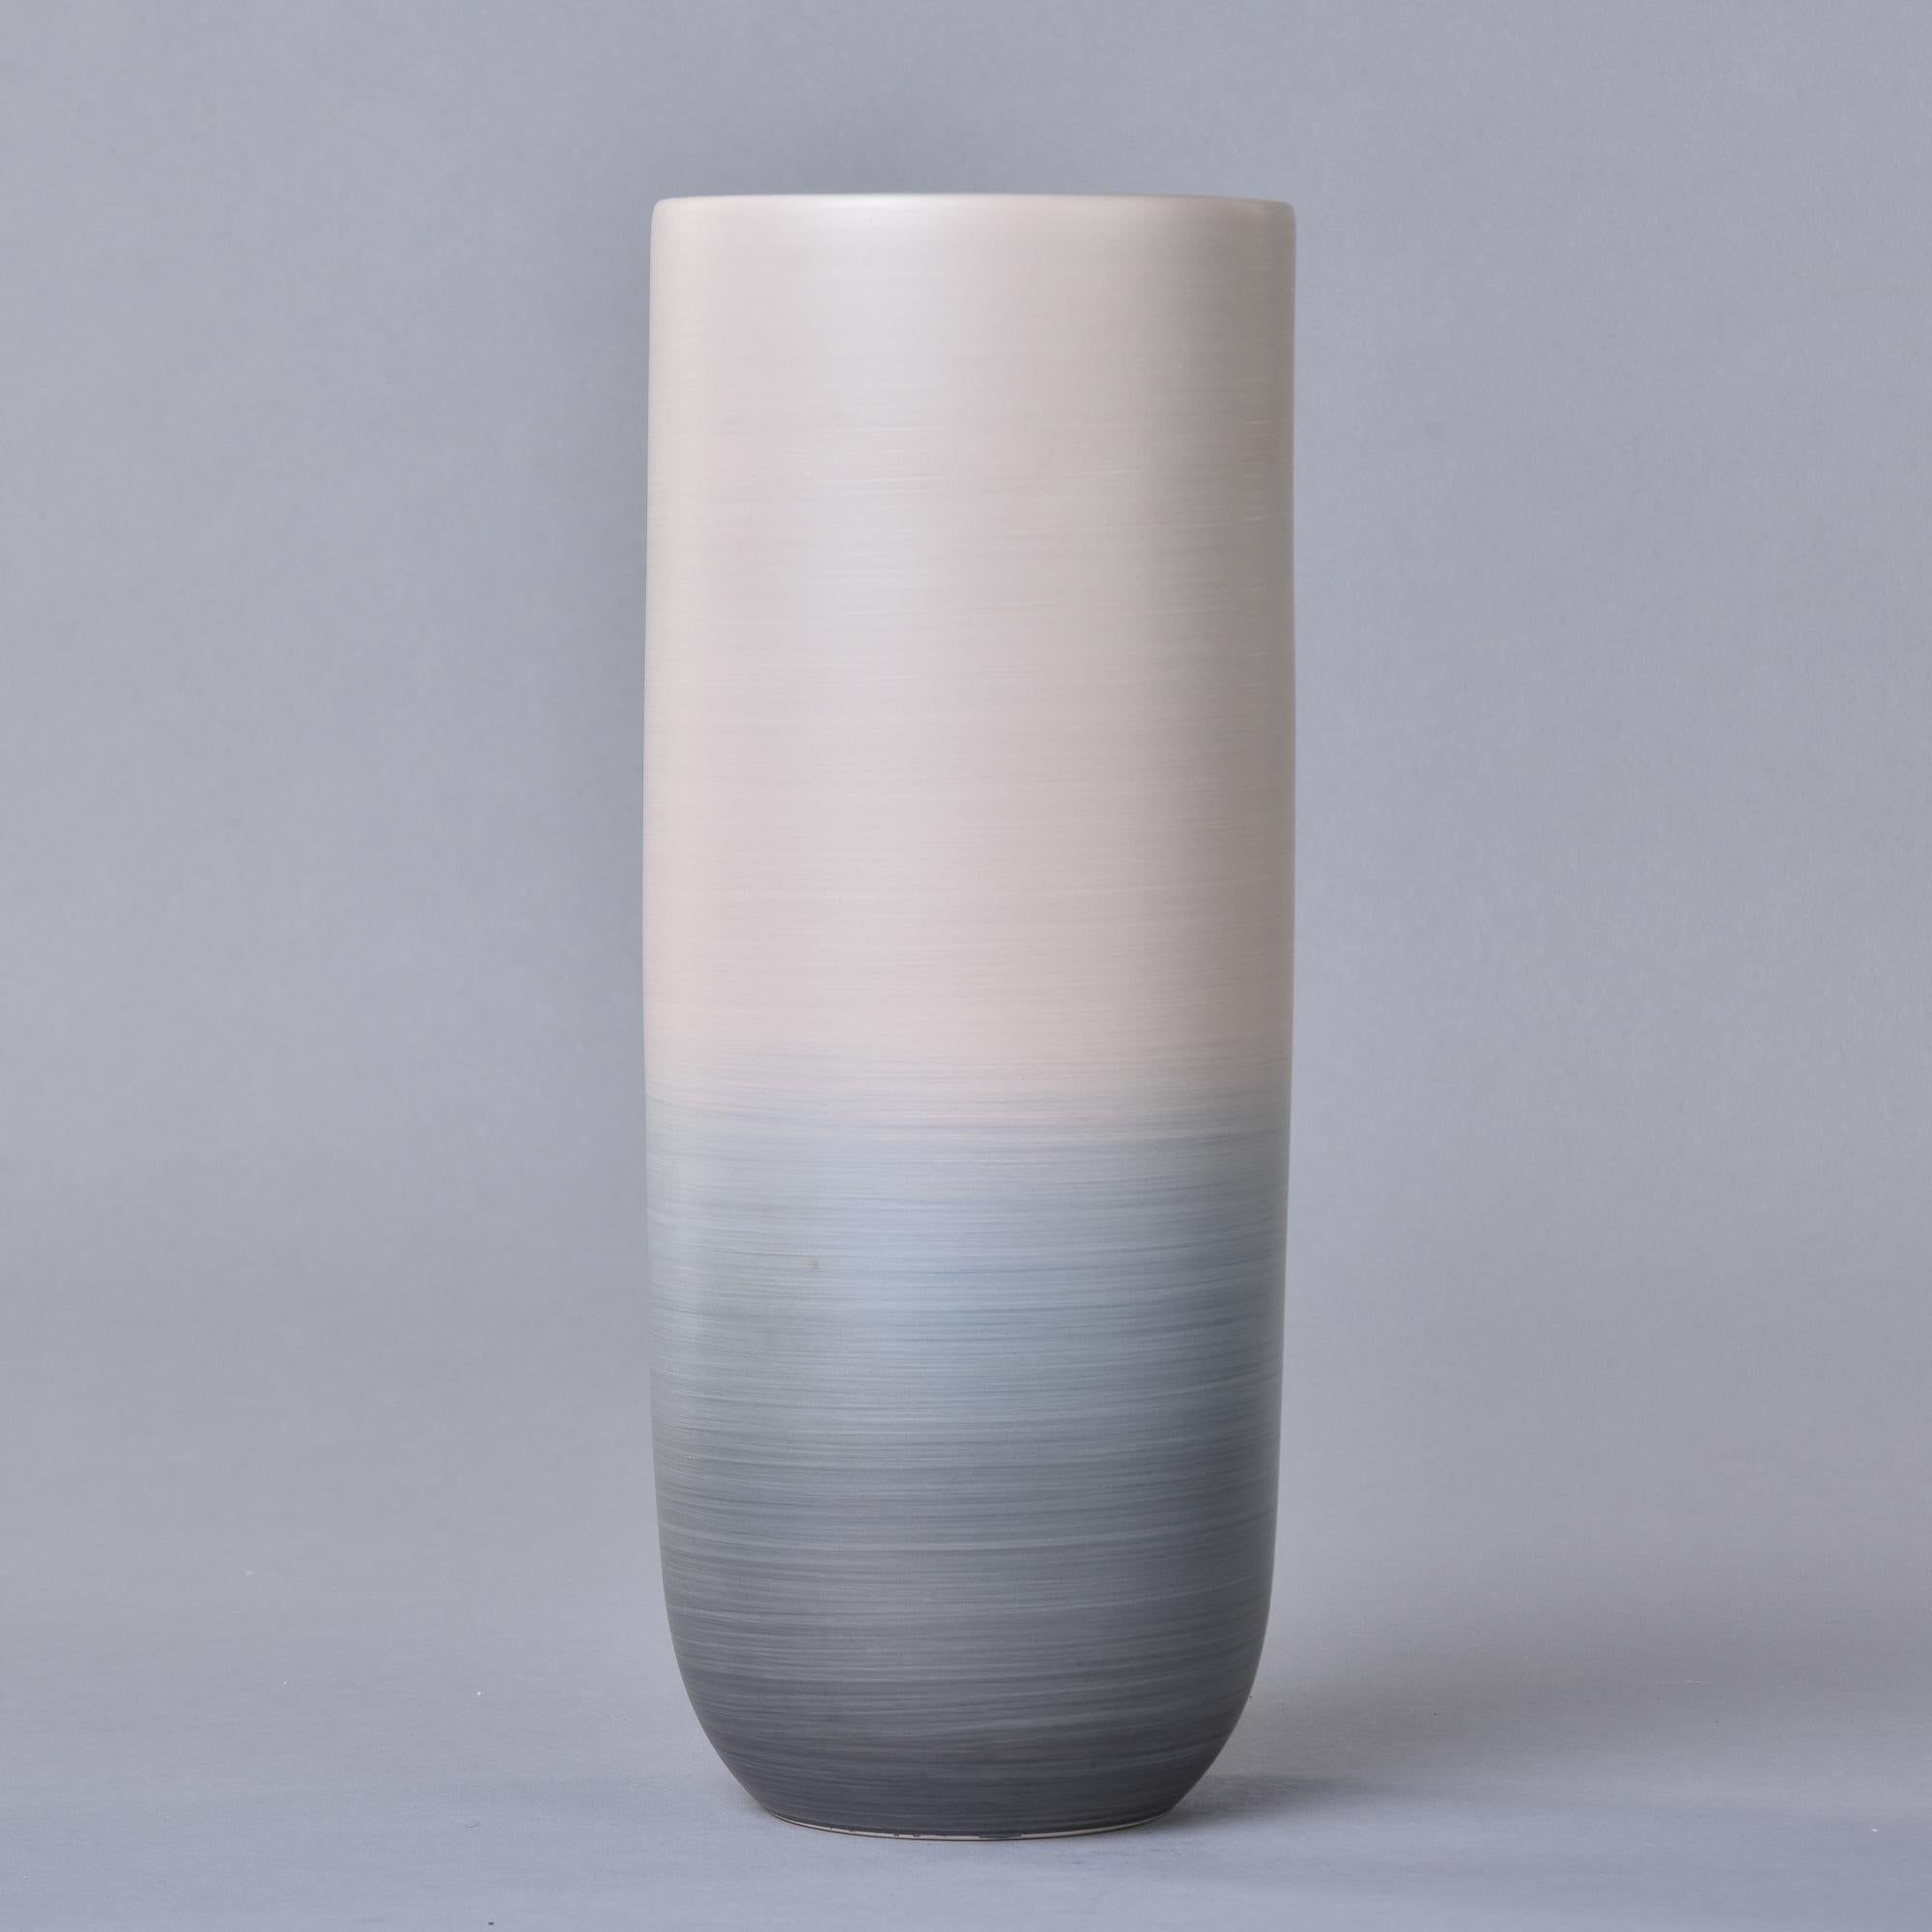 New and hand made in Italy by Rina Menardi, this vase stands over 12” tall and has an ombre style glaze in shades of beige and blue/gray. Streamlined shape with thin, glazed porcelain walls and a contrasting dark glaze on the inside. Signed by the